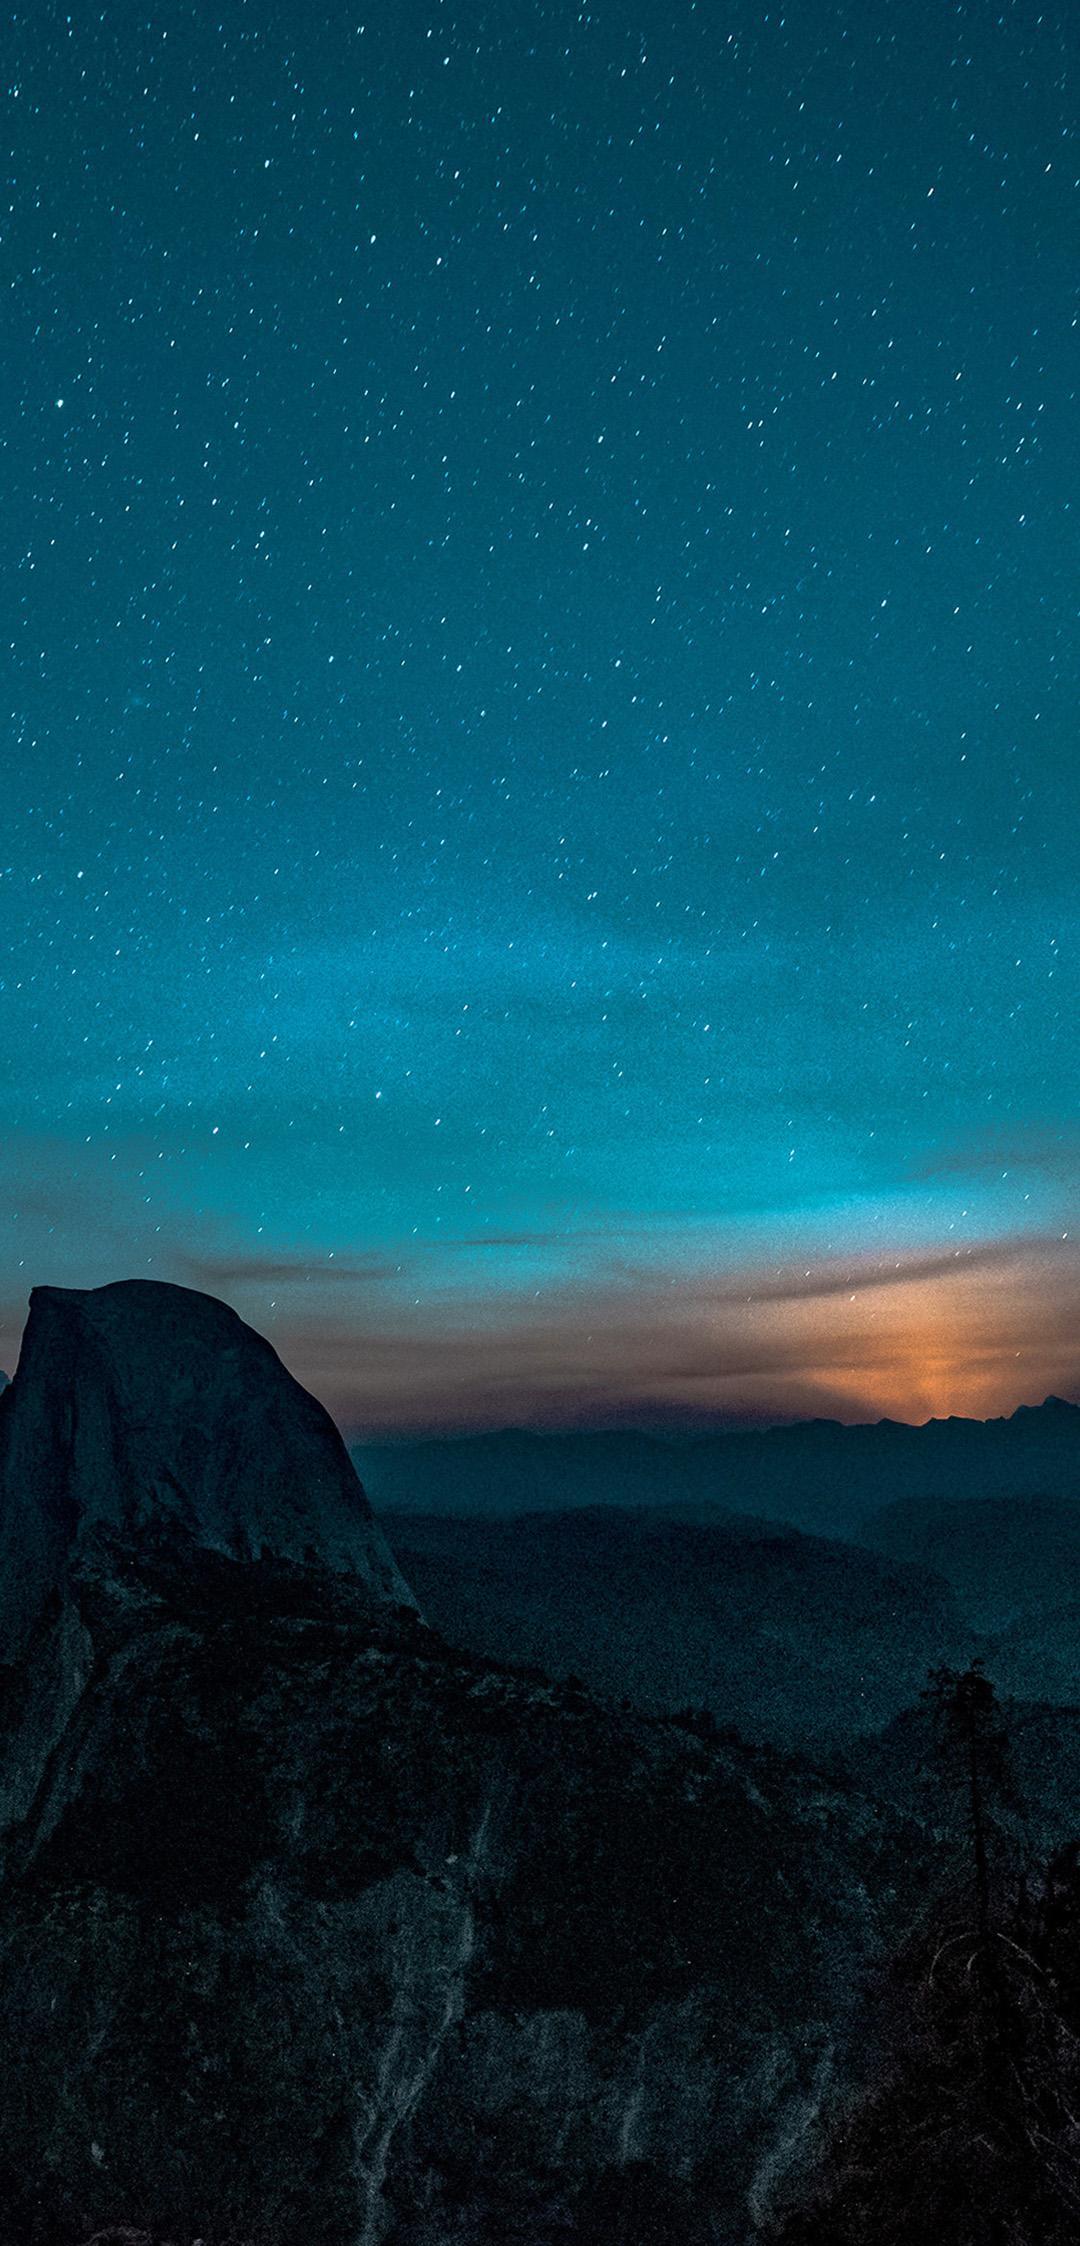 ns52 mountain night sky star space nature Wallpaper 1080 x 2246 HD